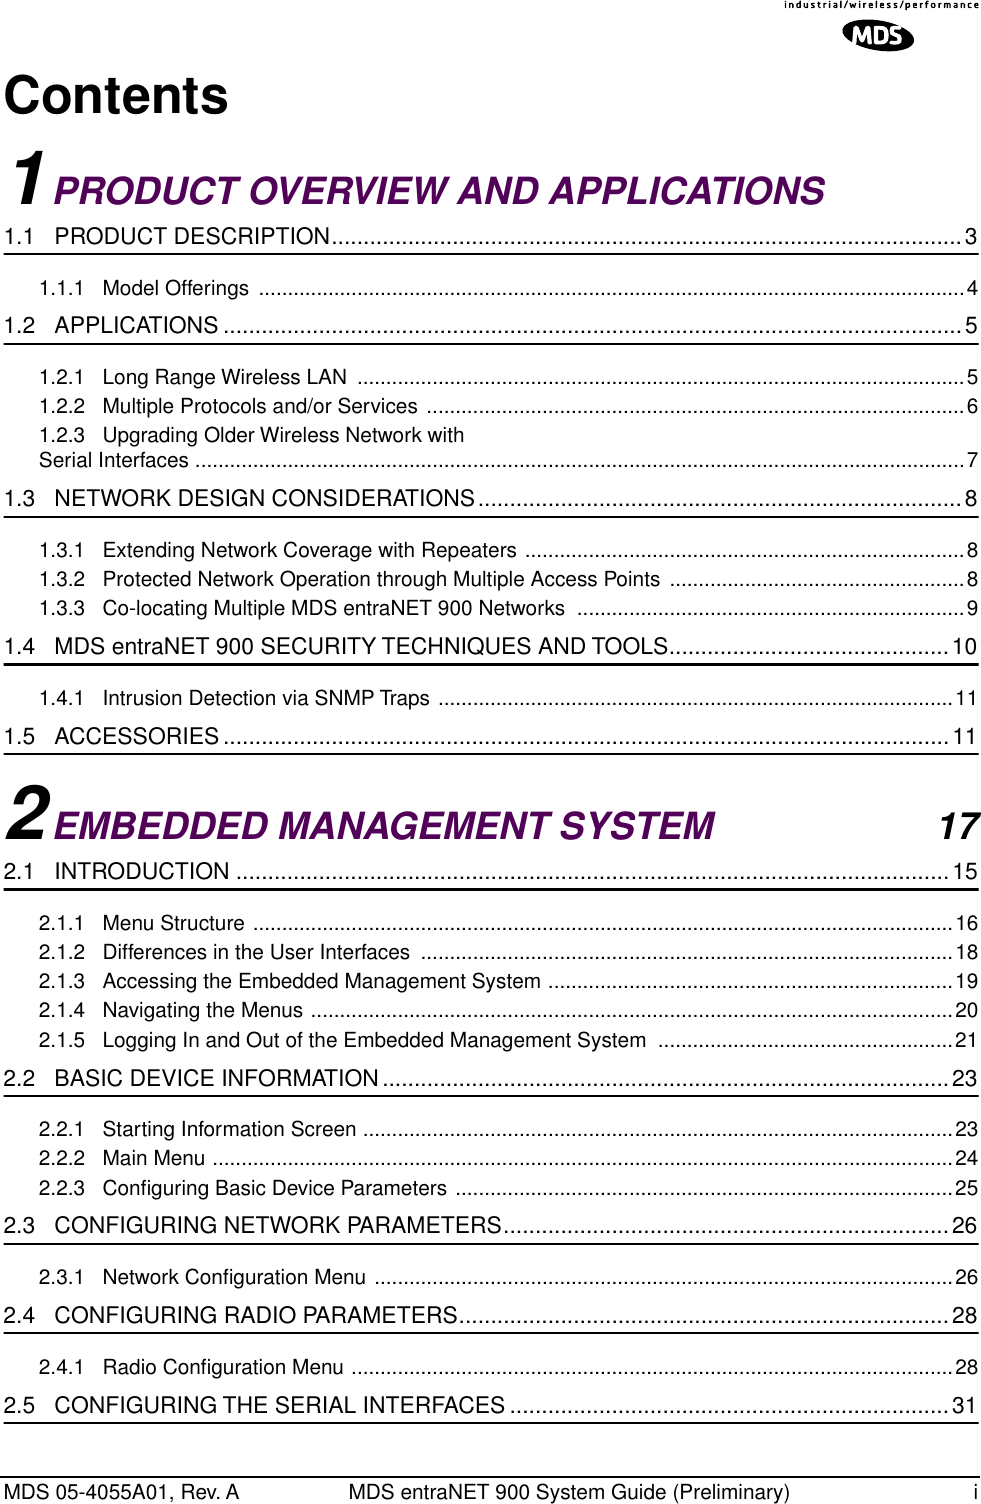  MDS 05-4055A01, Rev. A MDS entraNET 900 System Guide (Preliminary) i Contents 1 PRODUCT OVERVIEW AND APPLICATIONS  1.1   PRODUCT DESCRIPTION...................................................................................................3 1.1.1   Model Offerings  ..........................................................................................................................4 1.2   APPLICATIONS ....................................................................................................................5 1.2.1   Long Range Wireless LAN  .........................................................................................................51.2.2   Multiple Protocols and/or Services .............................................................................................61.2.3   Upgrading Older Wireless Network with Serial Interfaces .....................................................................................................................................7 1.3   NETWORK DESIGN CONSIDERATIONS............................................................................8 1.3.1   Extending Network Coverage with Repeaters ............................................................................81.3.2   Protected Network Operation through Multiple Access Points ...................................................81.3.3   Co-locating Multiple MDS entraNET 900 Networks  ...................................................................9 1.4   MDS entraNET 900 SECURITY TECHNIQUES AND TOOLS............................................10 1.4.1   Intrusion Detection via SNMP Traps .........................................................................................11 1.5   ACCESSORIES ..................................................................................................................11 2 EMBEDDED MANAGEMENT SYSTEM 17 2.1   INTRODUCTION ................................................................................................................15 2.1.1   Menu Structure .........................................................................................................................162.1.2   Differences in the User Interfaces  ............................................................................................182.1.3   Accessing the Embedded Management System ......................................................................192.1.4   Navigating the Menus ...............................................................................................................202.1.5   Logging In and Out of the Embedded Management System  ...................................................21 2.2   BASIC DEVICE INFORMATION.........................................................................................23 2.2.1   Starting Information Screen ......................................................................................................232.2.2   Main Menu ................................................................................................................................242.2.3   Conﬁguring Basic Device Parameters ......................................................................................25 2.3   CONFIGURING NETWORK PARAMETERS......................................................................26 2.3.1   Network Conﬁguration Menu ....................................................................................................26 2.4   CONFIGURING RADIO PARAMETERS.............................................................................28 2.4.1   Radio Conﬁguration Menu ........................................................................................................28 2.5   CONFIGURING THE SERIAL INTERFACES .....................................................................31